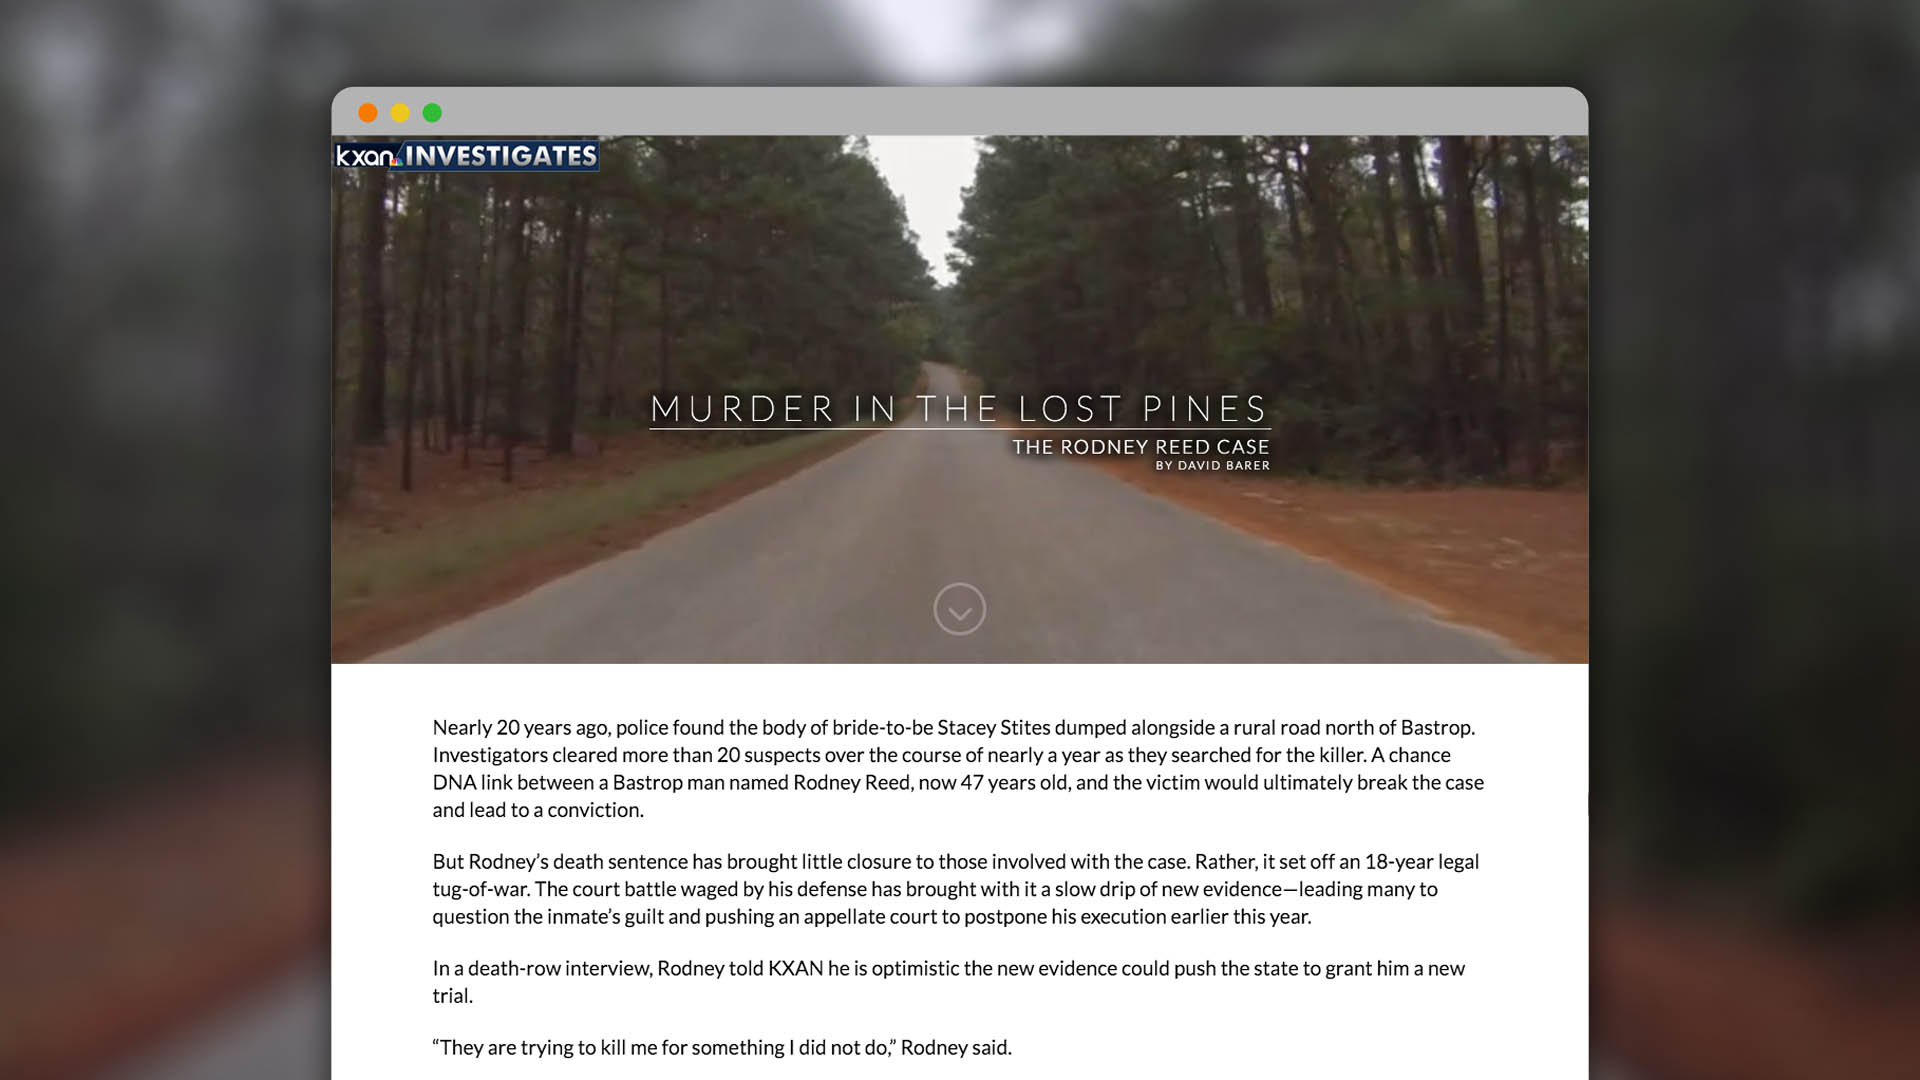 KXAN Investigates – "Murder in the Lost Pines" Web Special